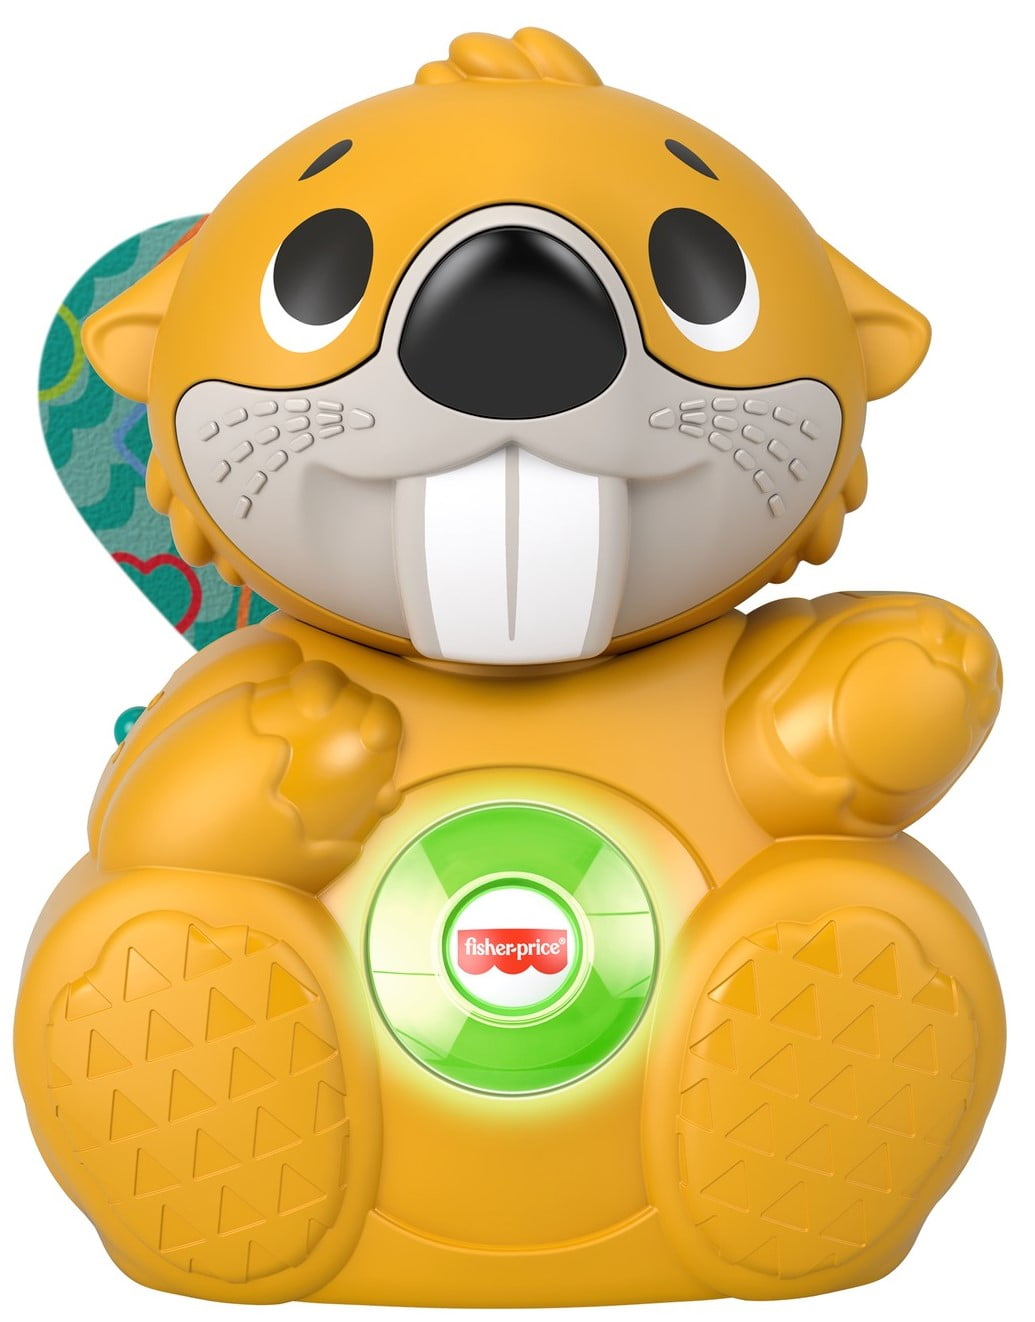 Linkimals Smooth Moves Sloth Baby Toy With Music for sale online Award Winning Fisher 